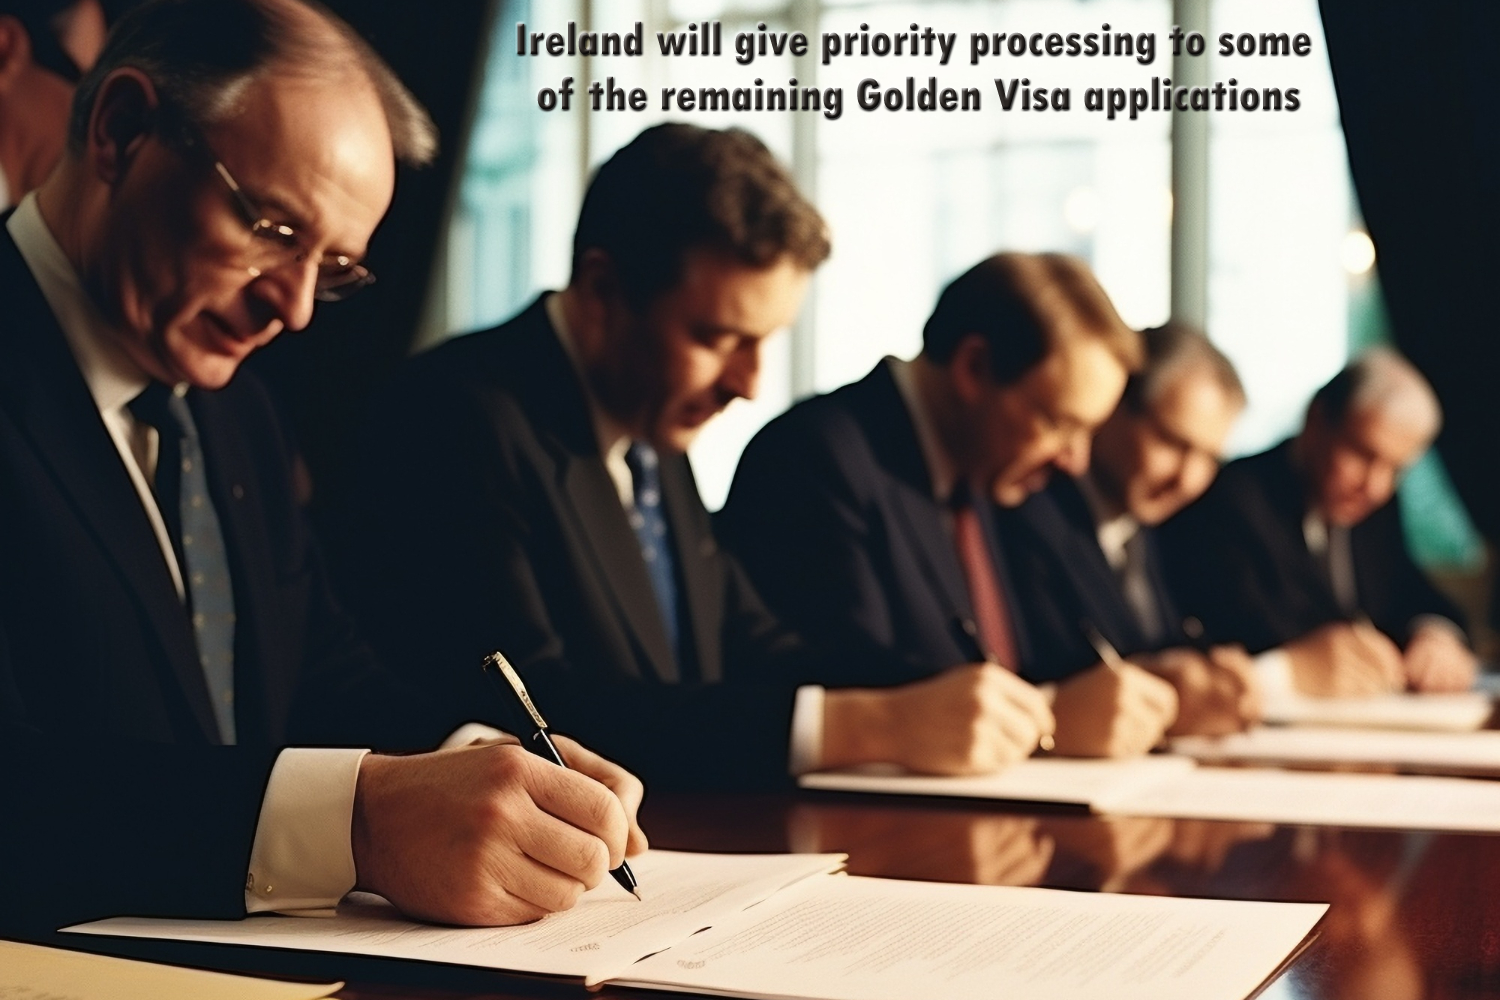 Ireland will give priority processing to some of the remaining Golden Visa applications.